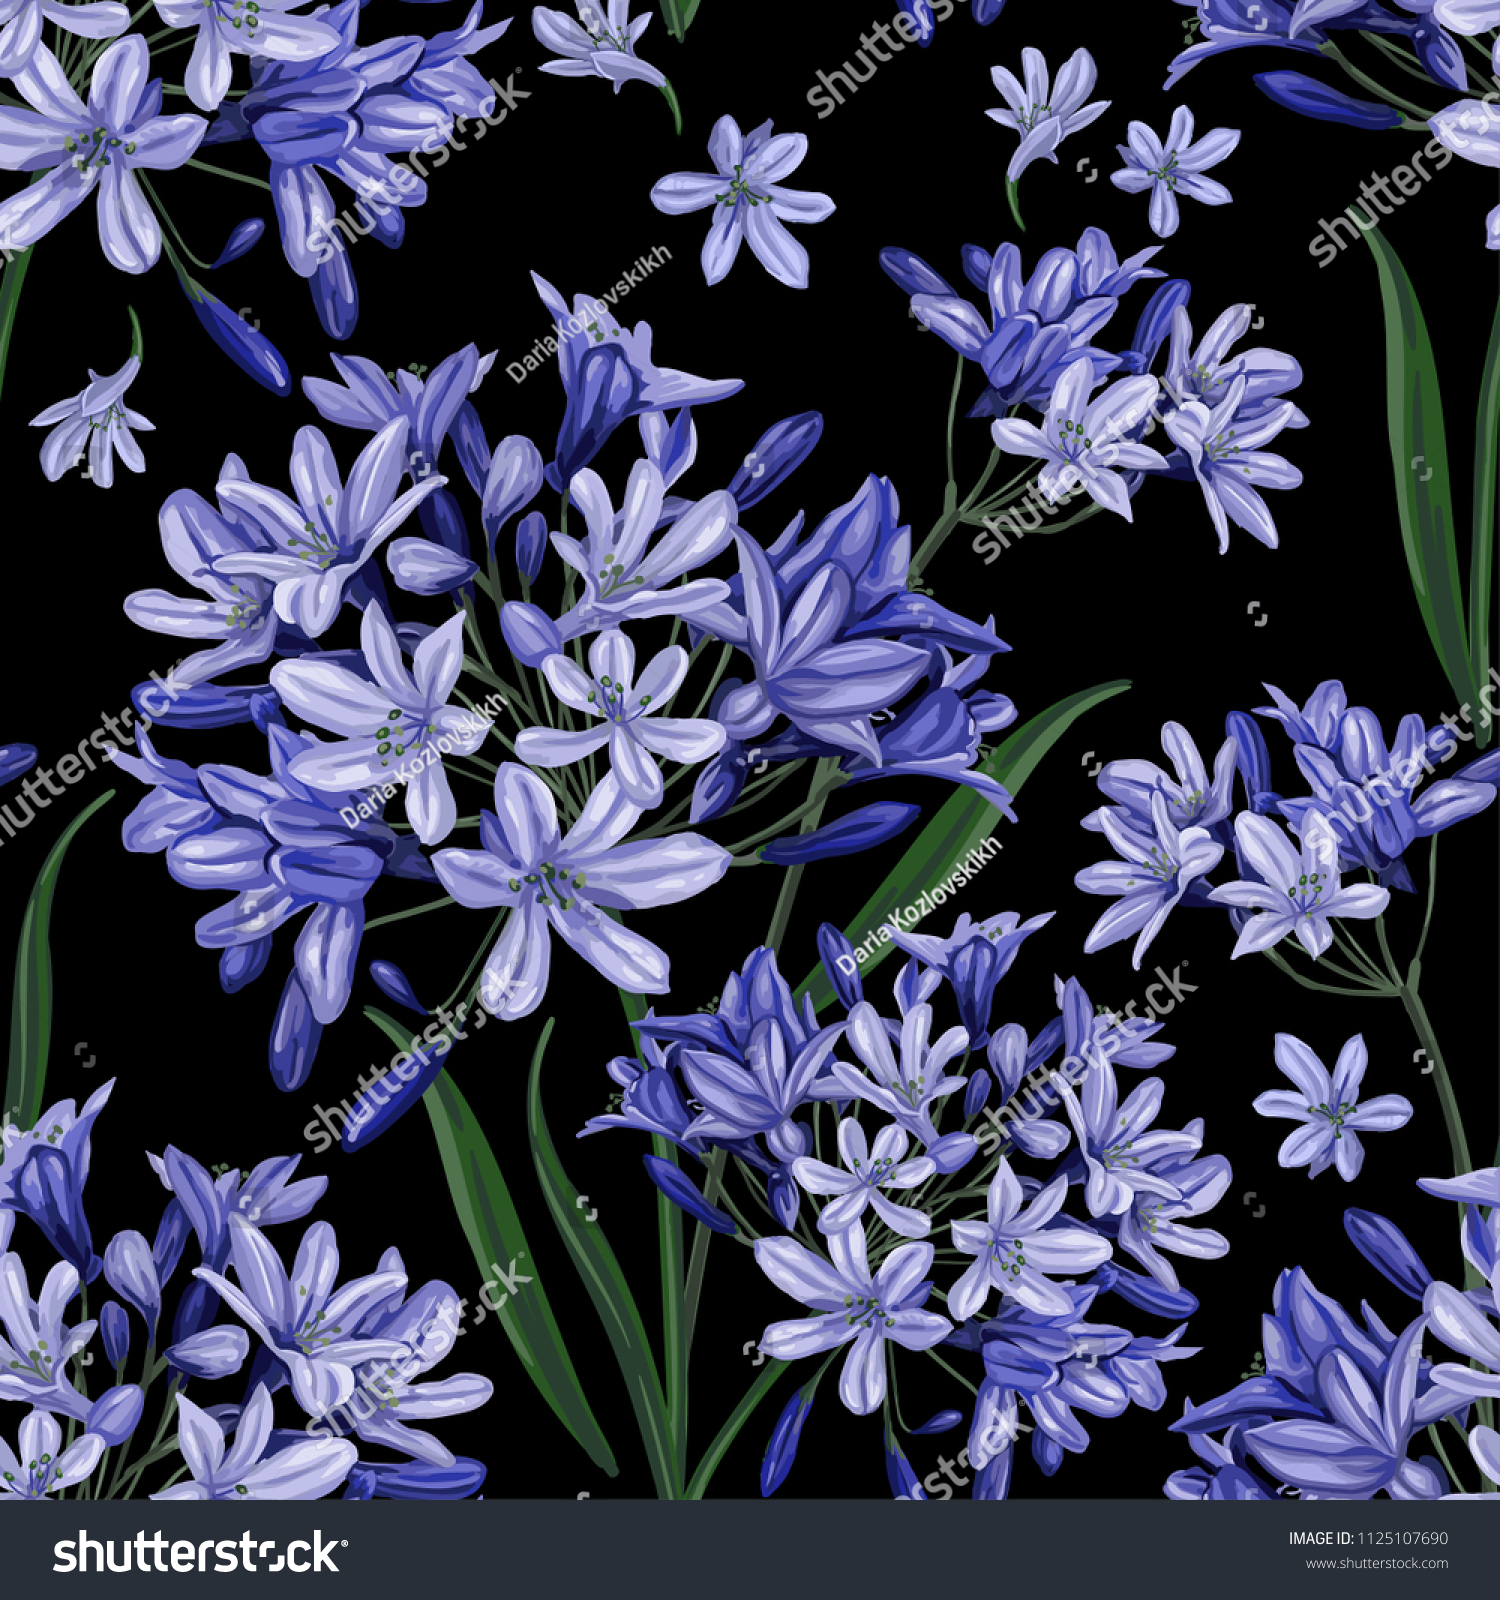 SVG of 
Blue flowers on a black background. Fashionable seamless pattern svg